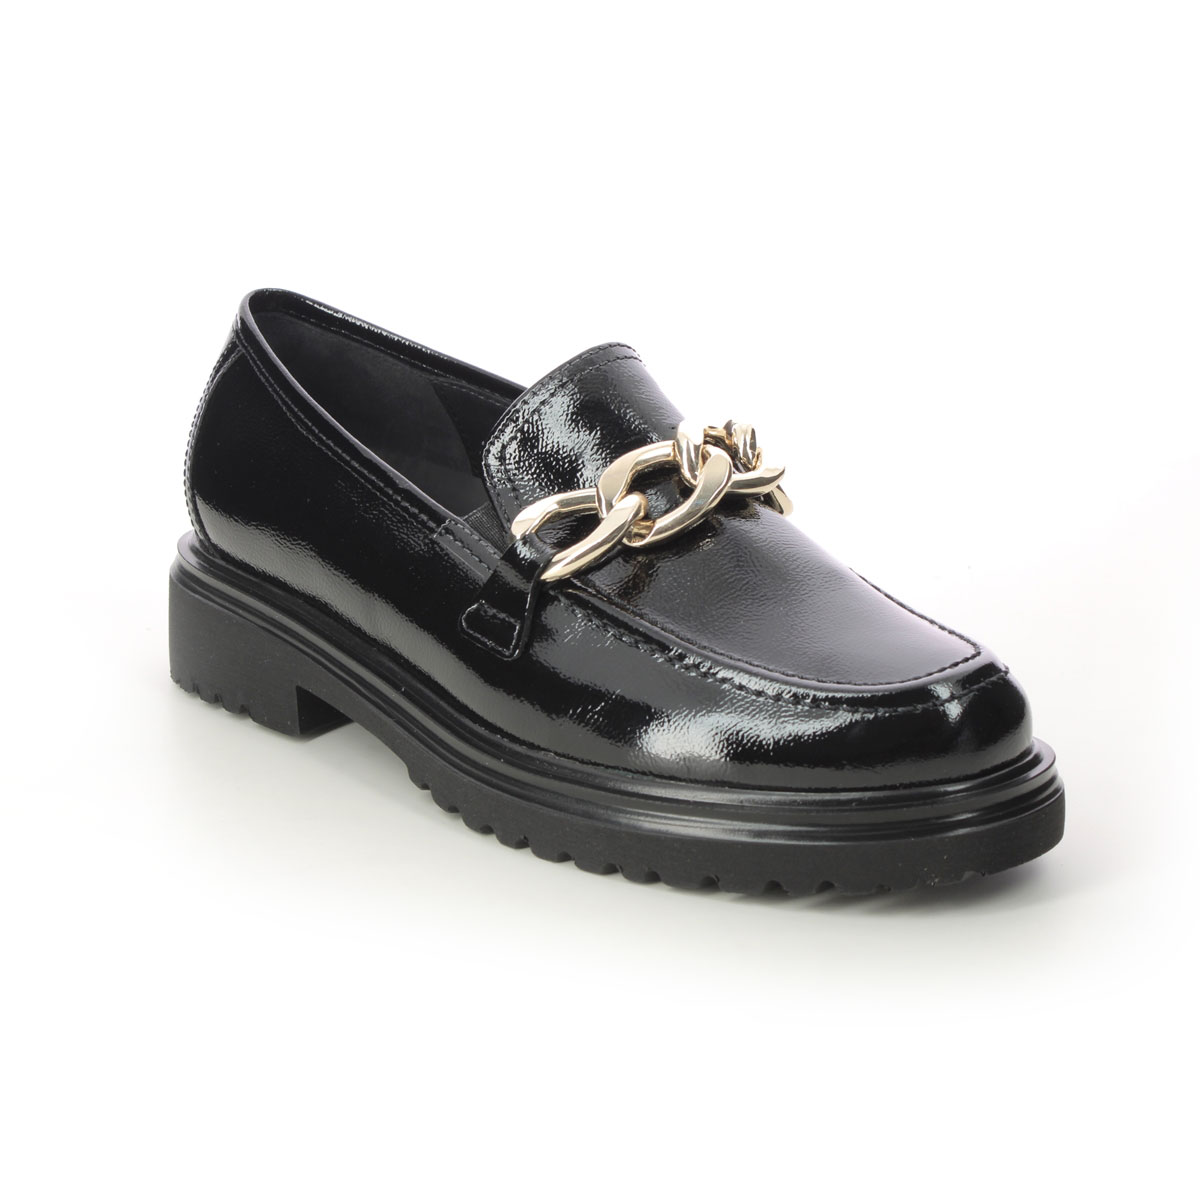 Gabor Florida H Black Patent Womens Loafers 92.554.97 In Size 4 In Plain Black Patent  Womens Comfort Slip On Shoes In Soft Black Patent Leather